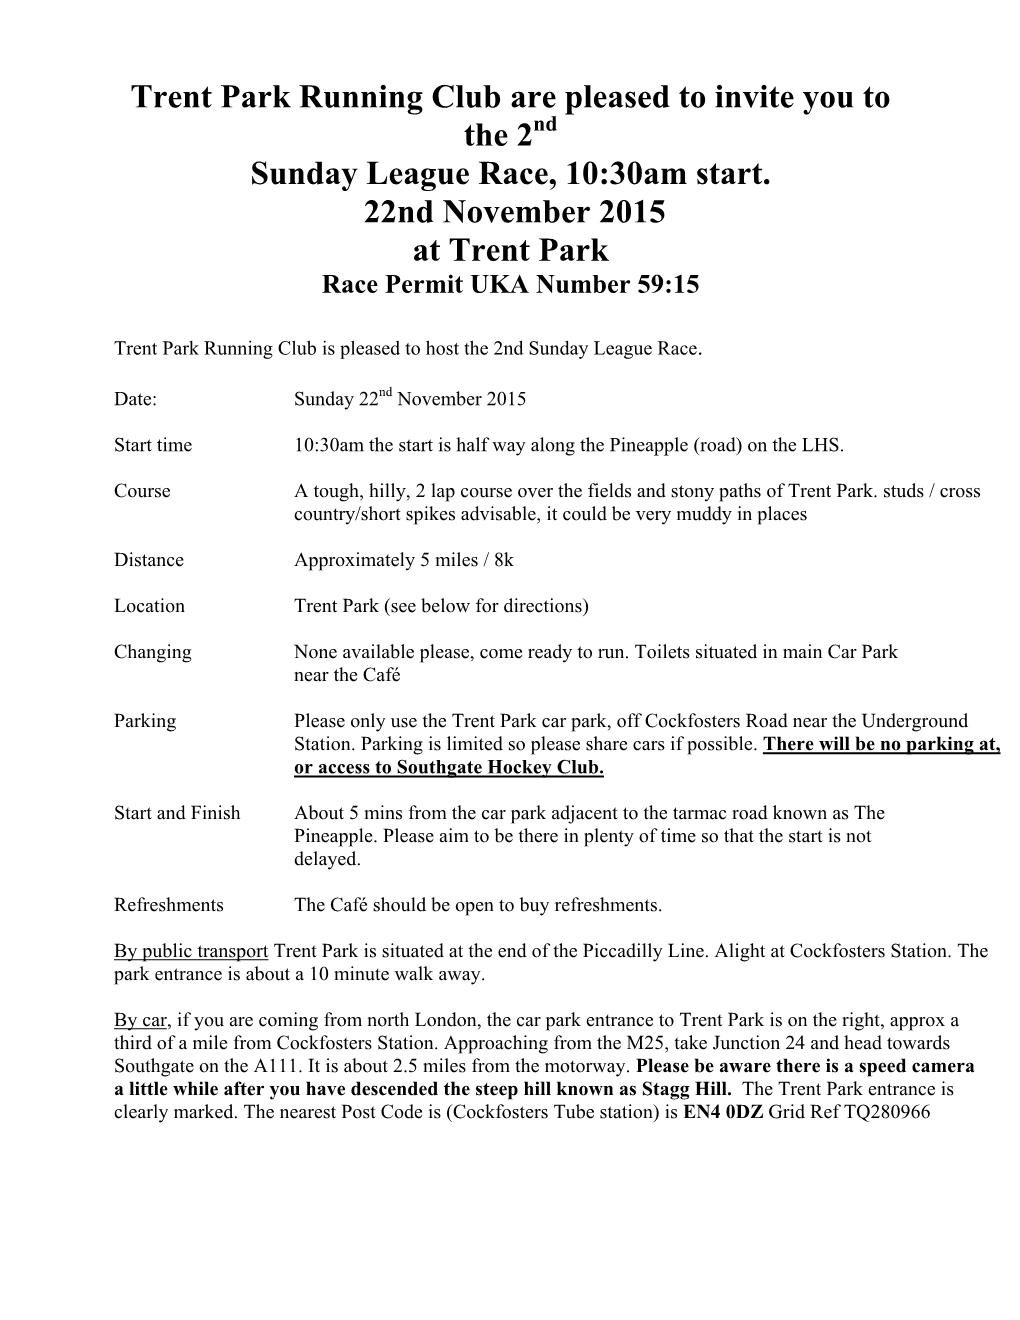 Trent Park Running Club Are Pleased to Invite You to the 2Nd Sunday League Race, 10:30Am Start